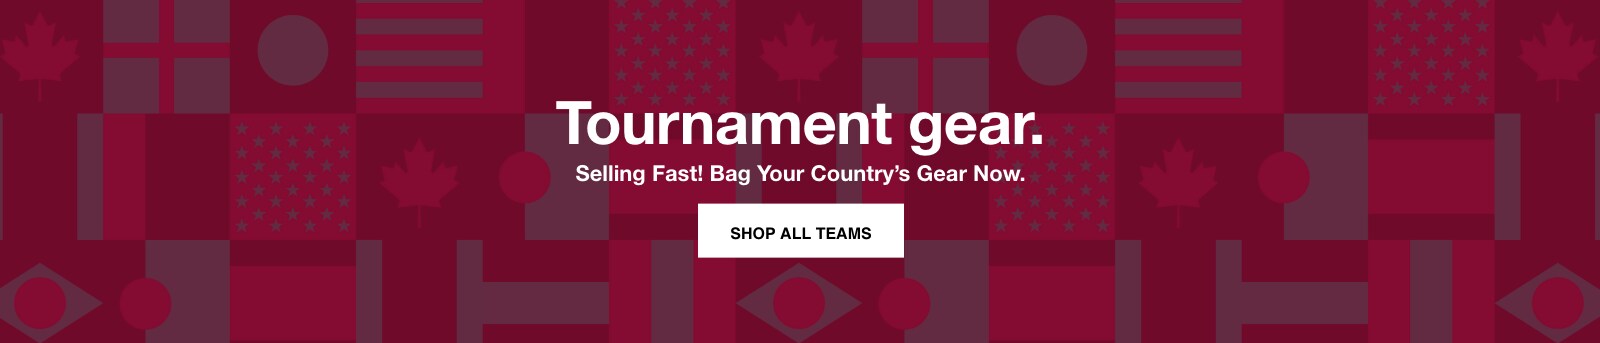 Bag Your Country's Gear Now